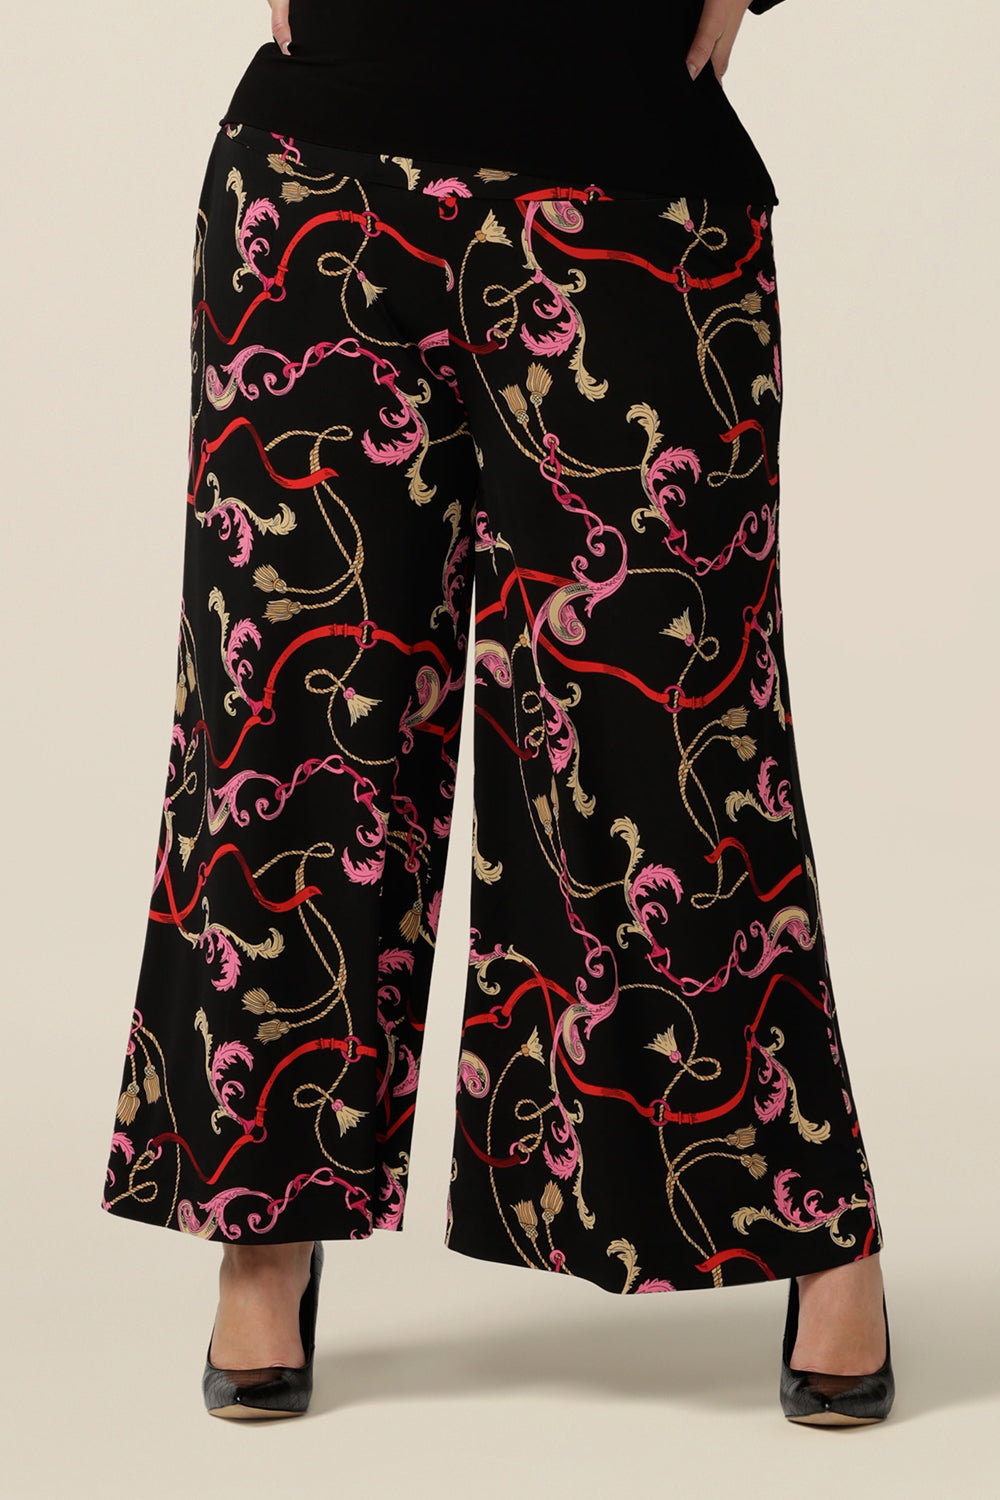 A plus size, size 18 woman wears printed wide leg pants with pockets. These pull-on, easy care pants are comfortable for your everyday workwear capsule wardrobe. Shop these Australian-made wide leg trousers online in sizes 8 to 24, petite to plus sizes.